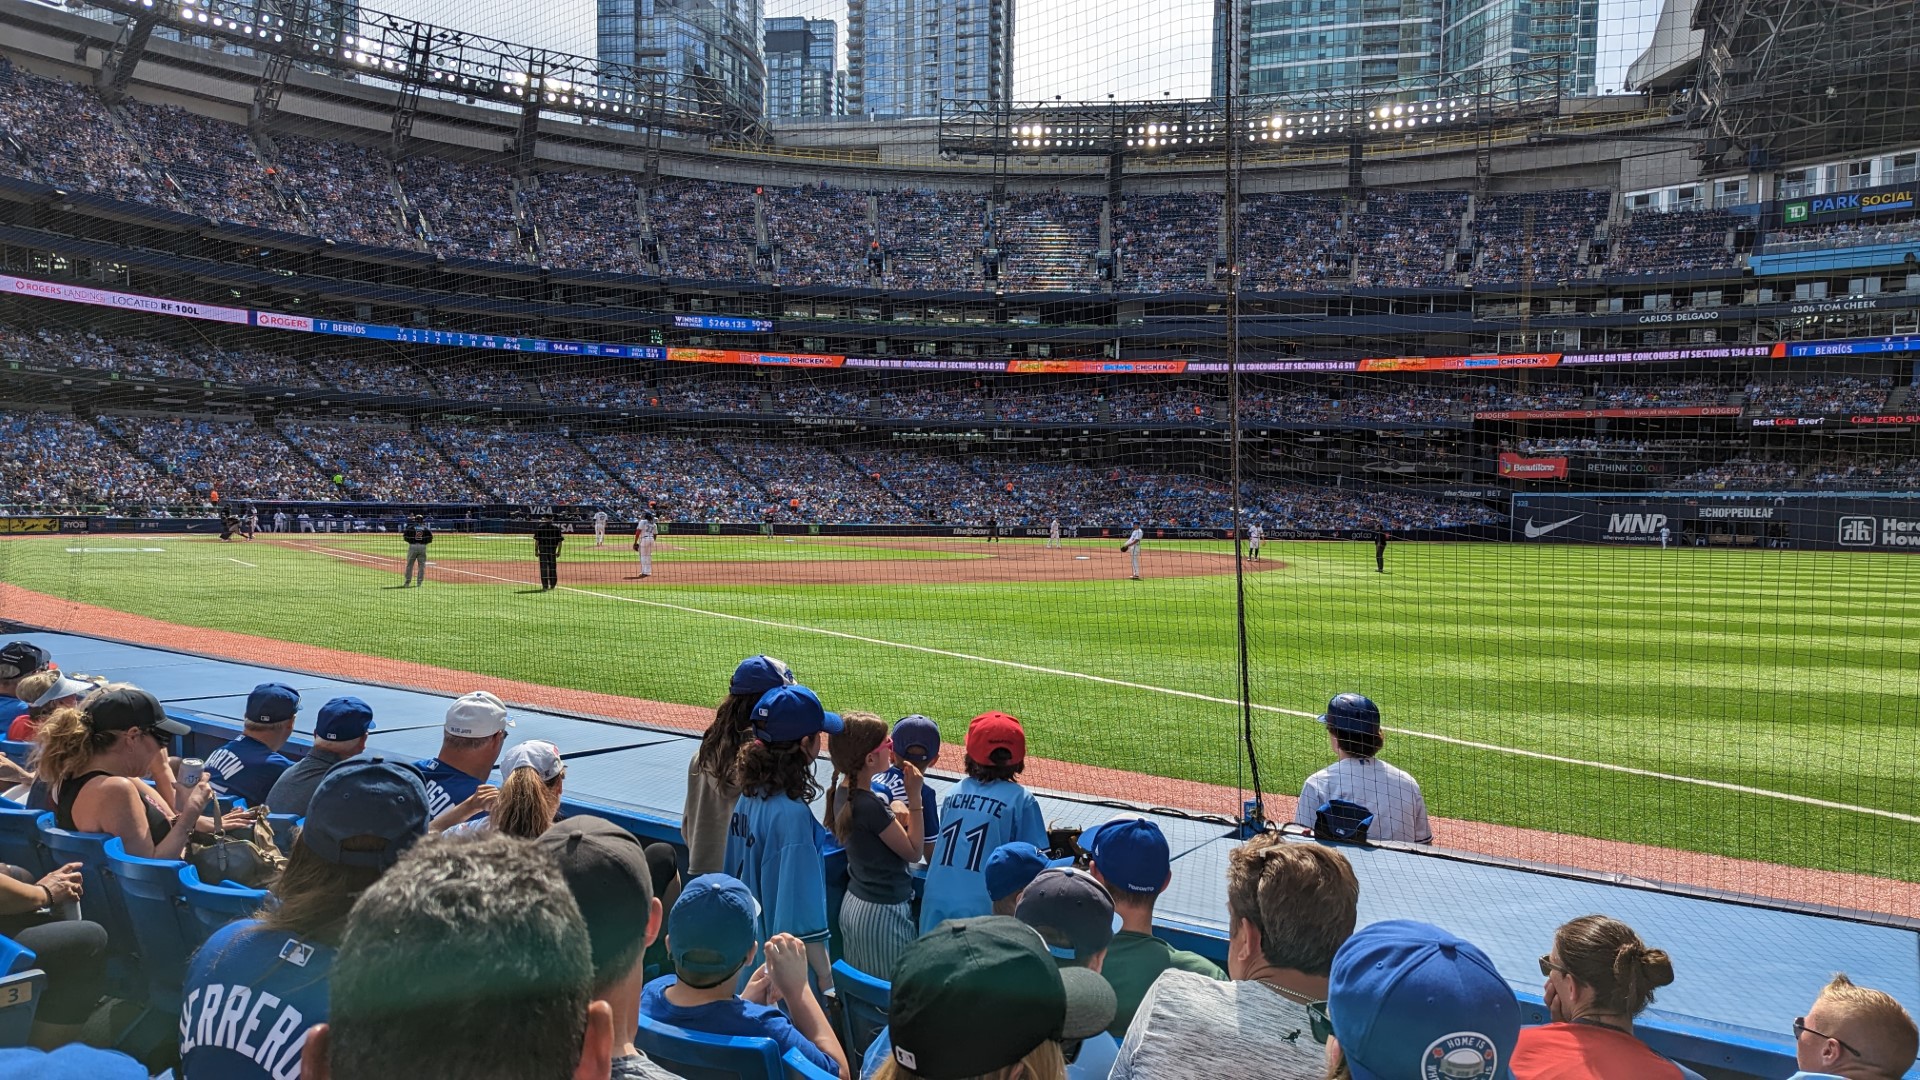 Take Me Out to the Blue Jays Game! - Explore As a Family